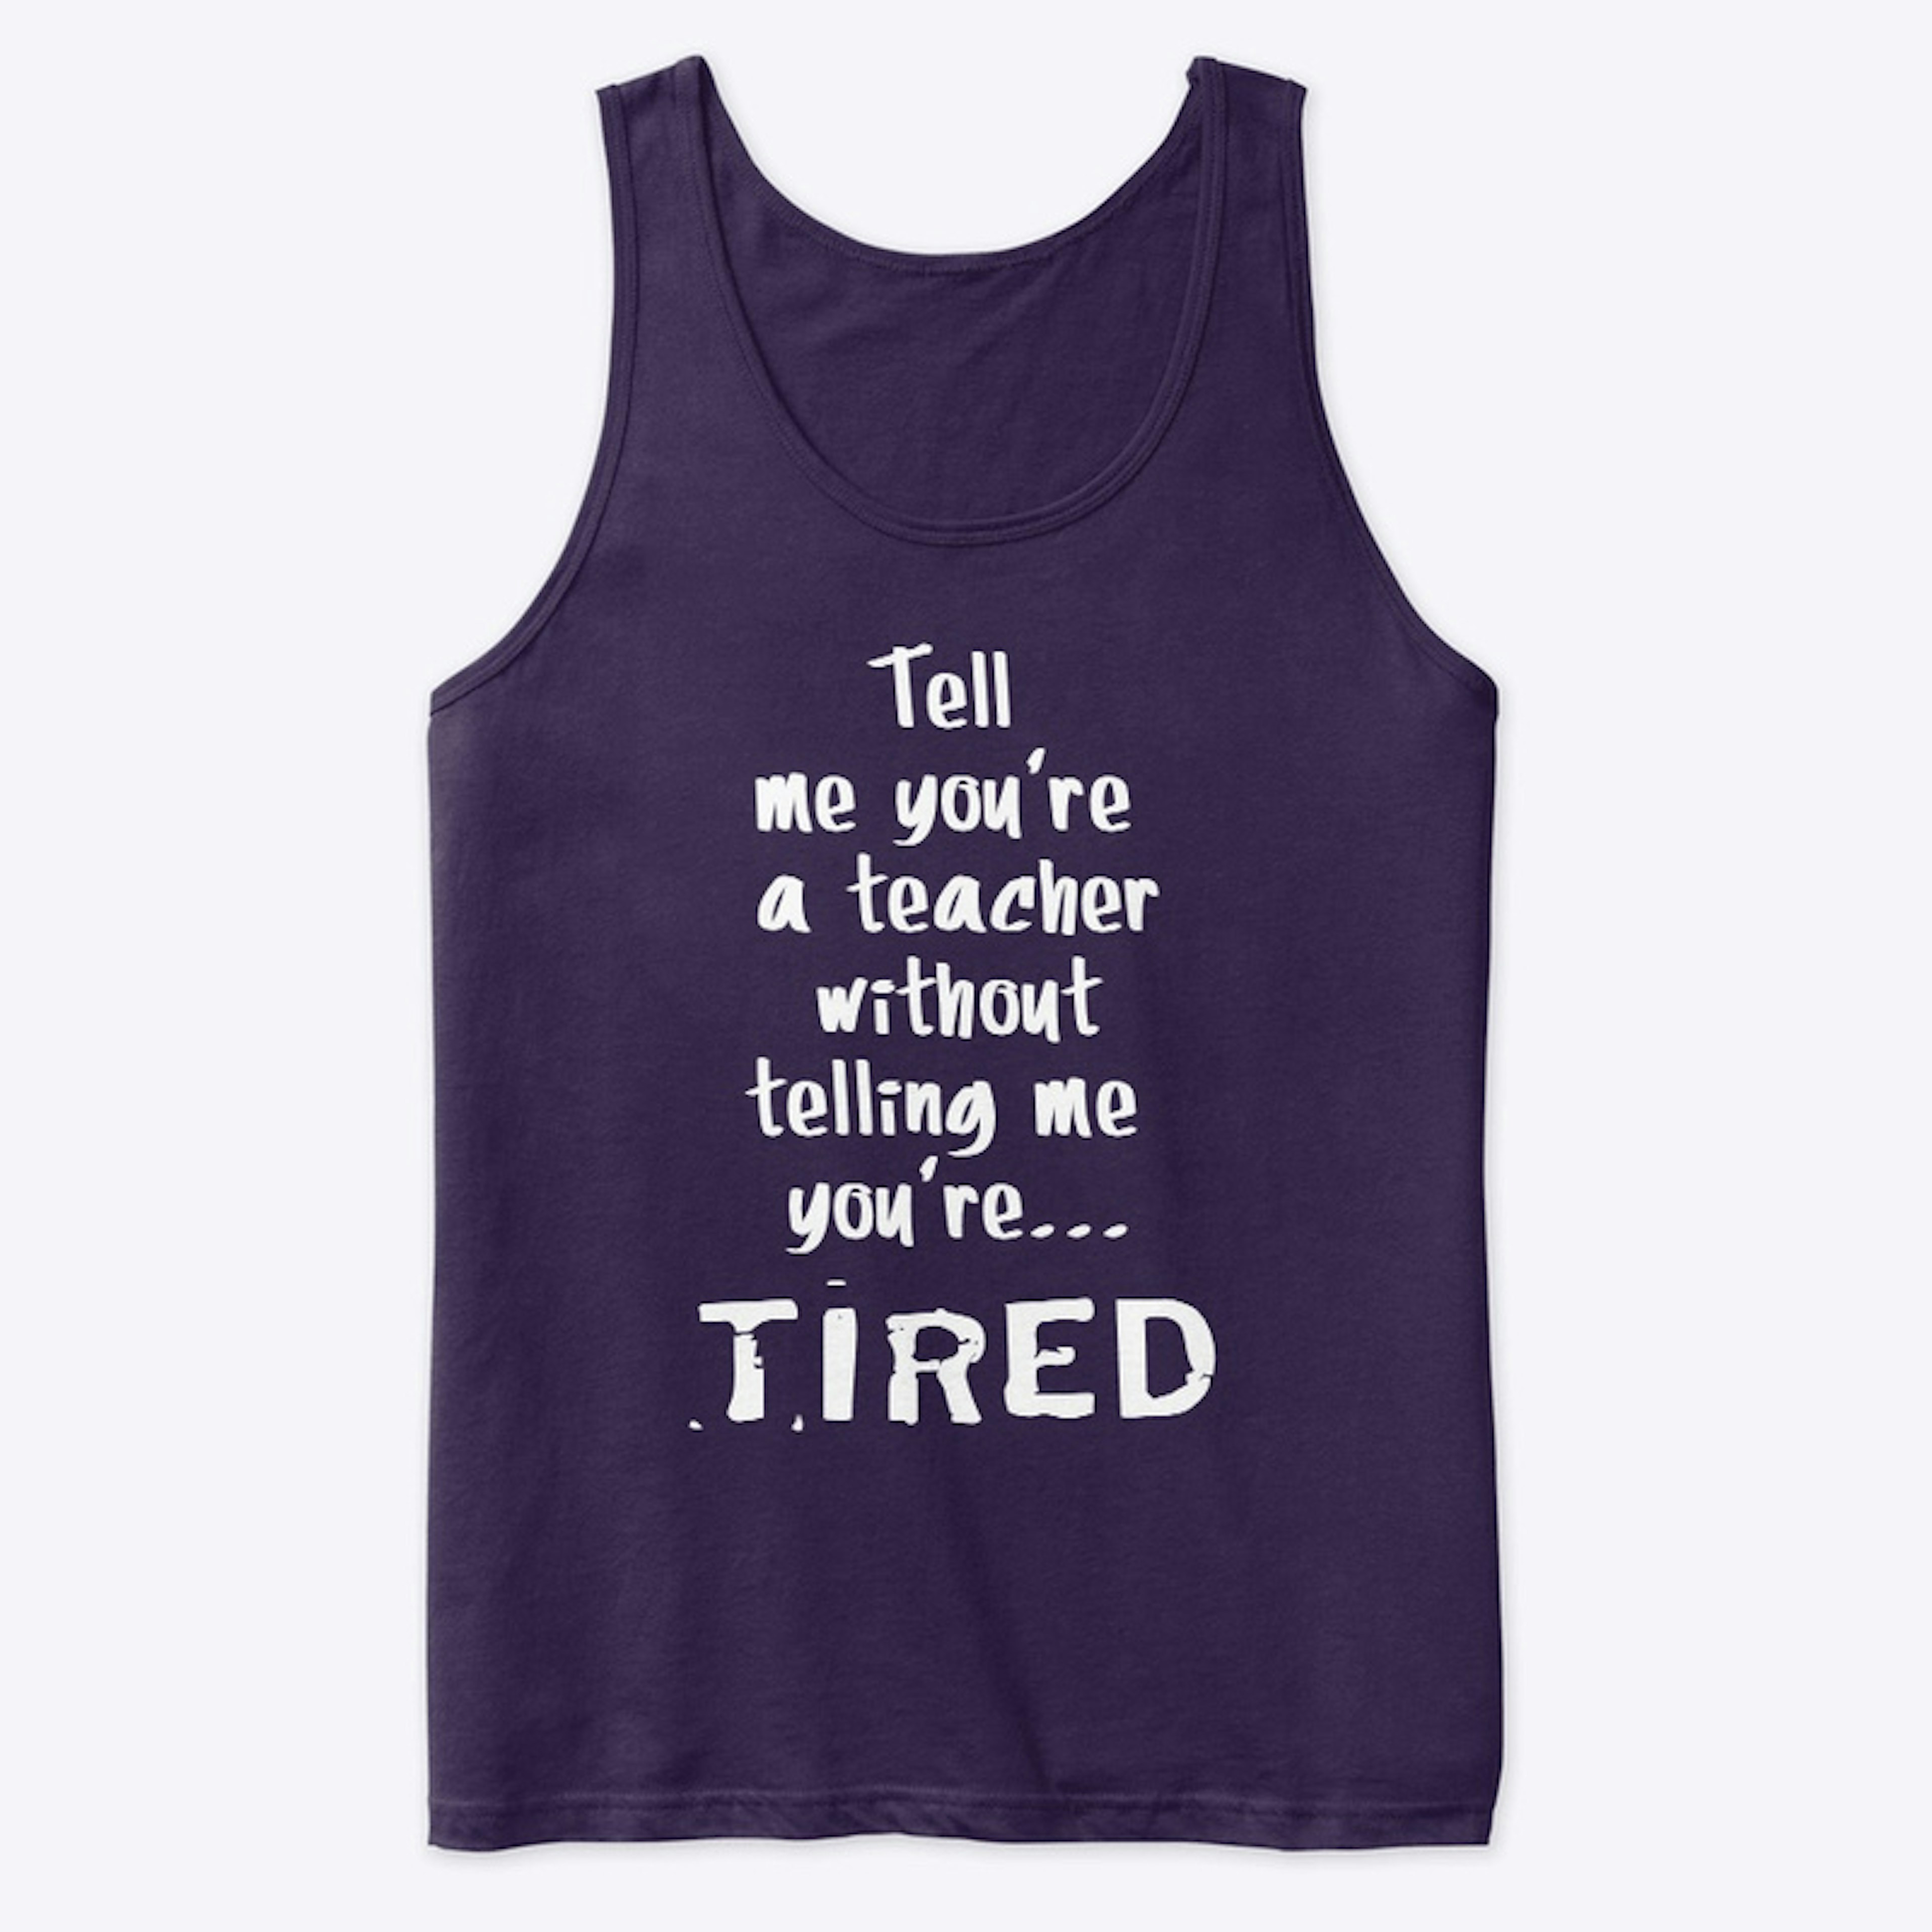 Tired Teachers..need our SUPPORT